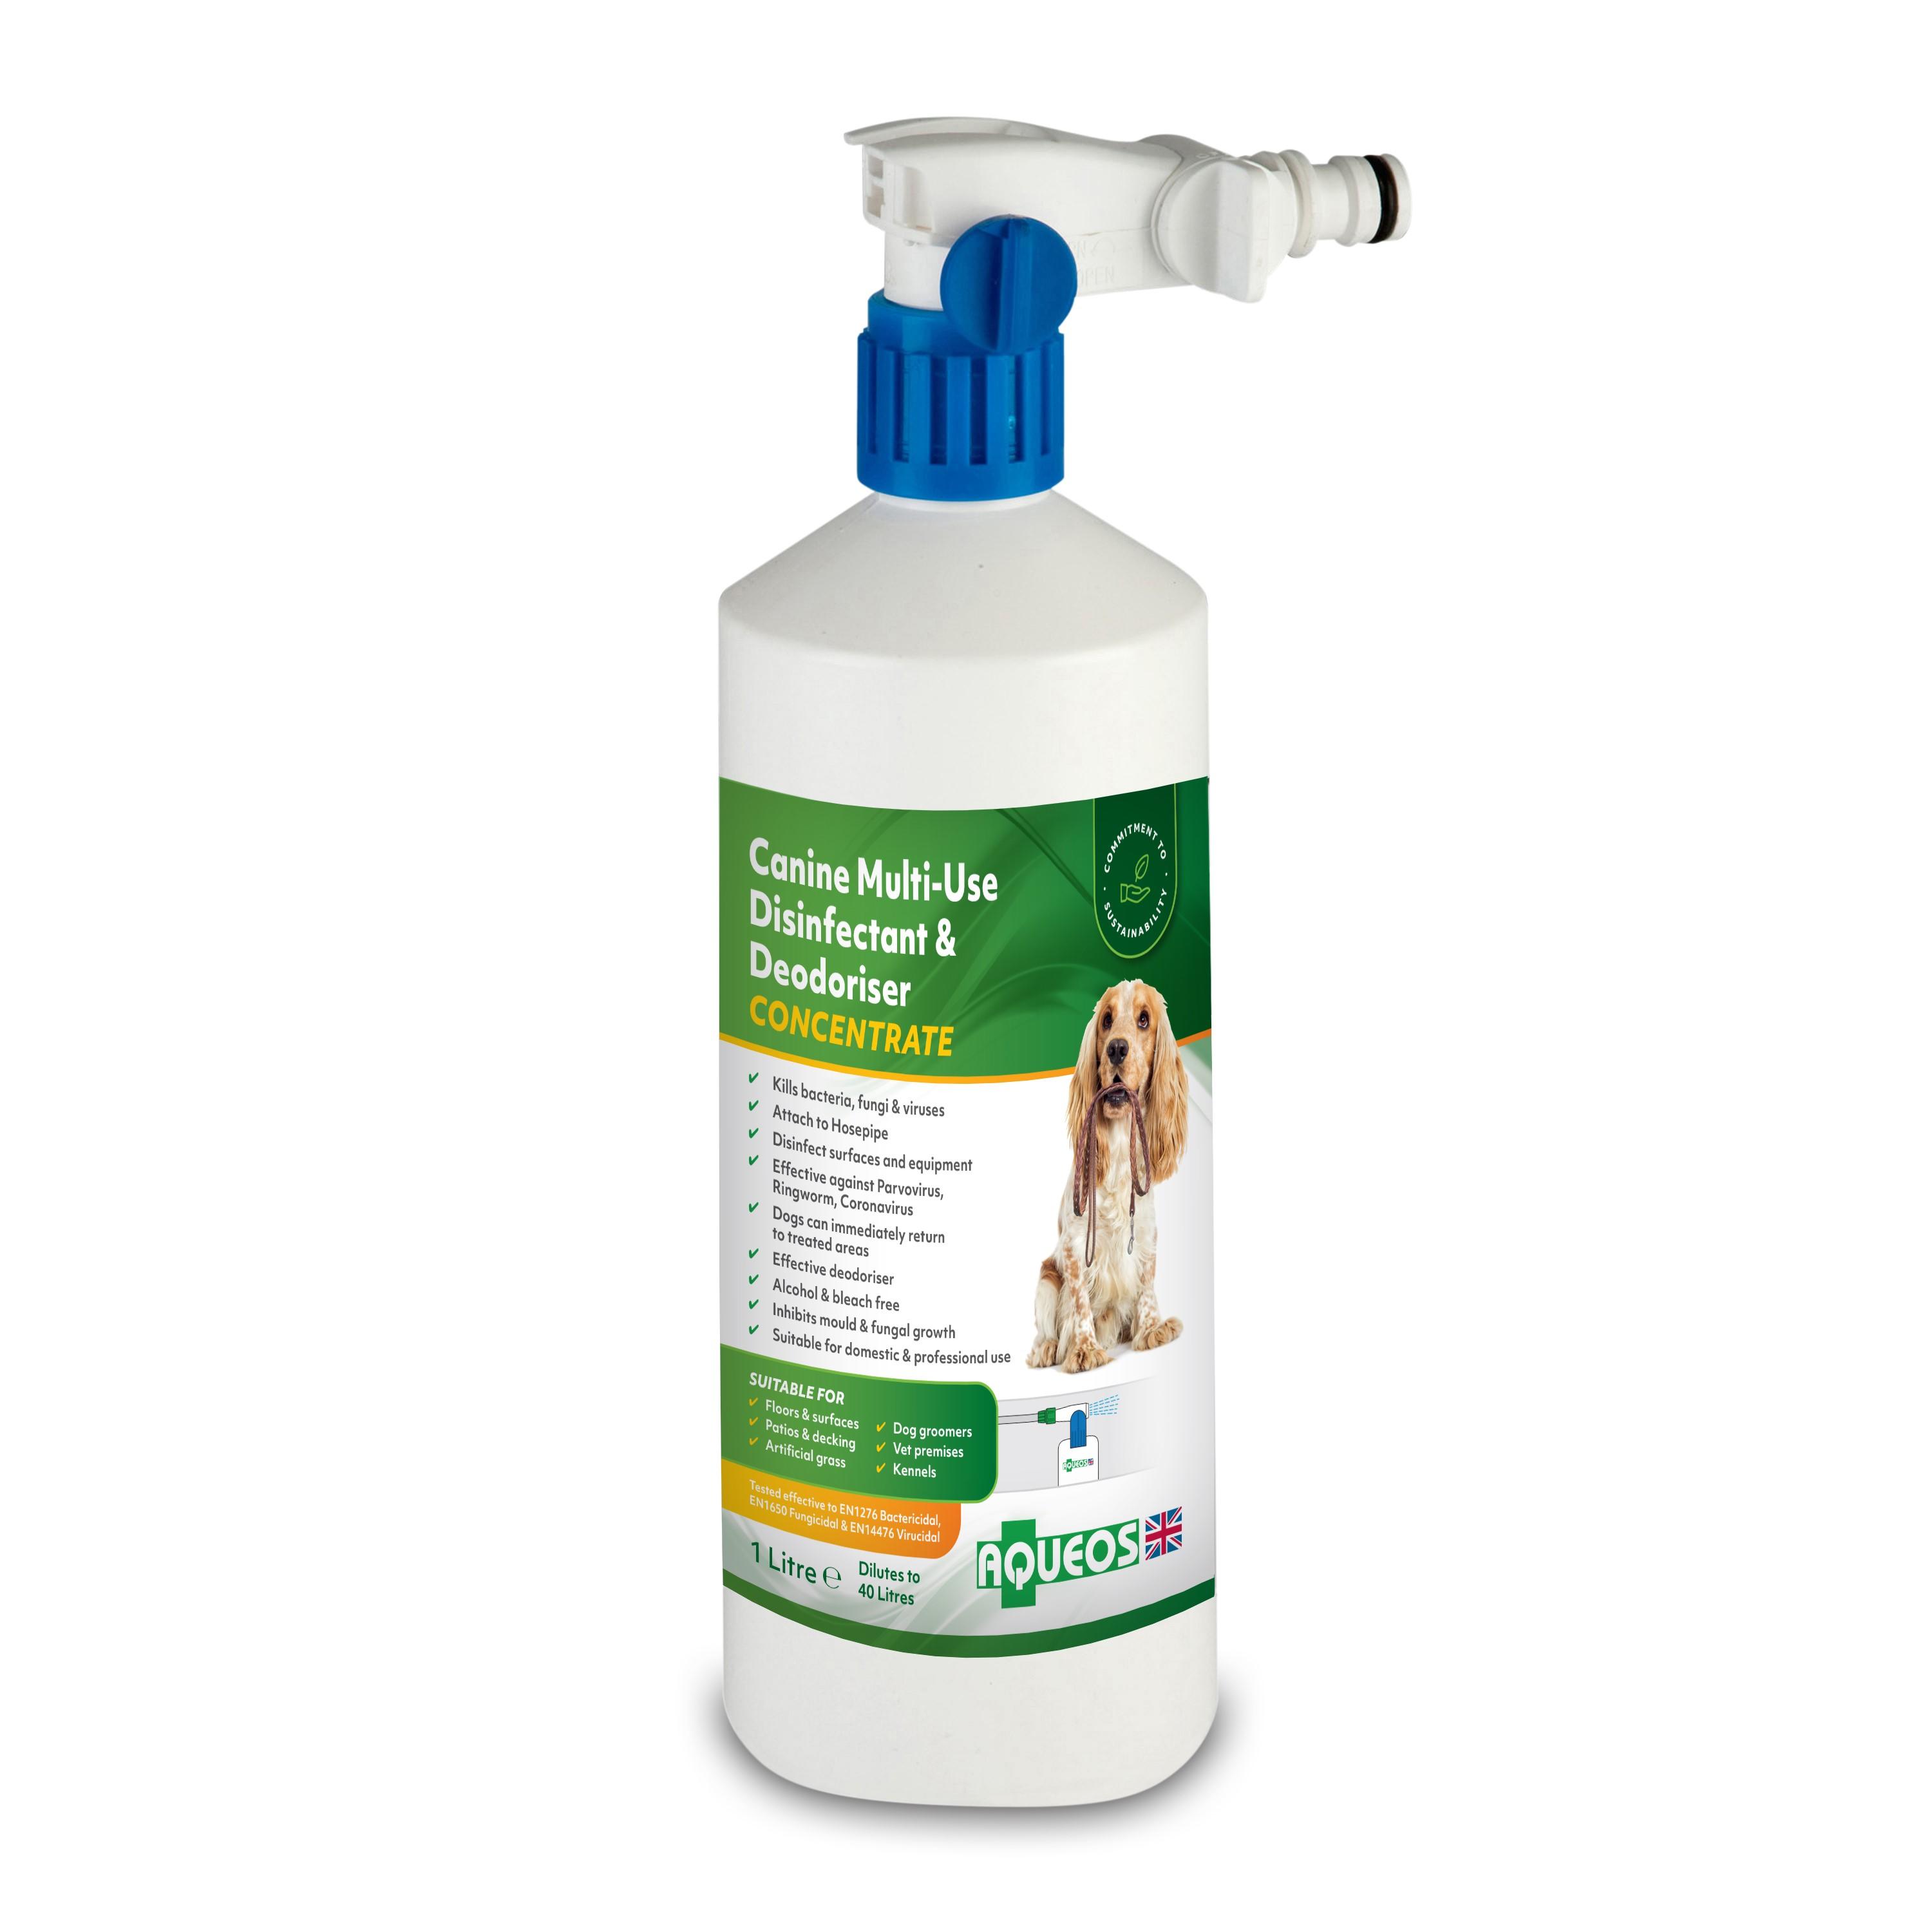 Canine disinfectant for patios and kennels